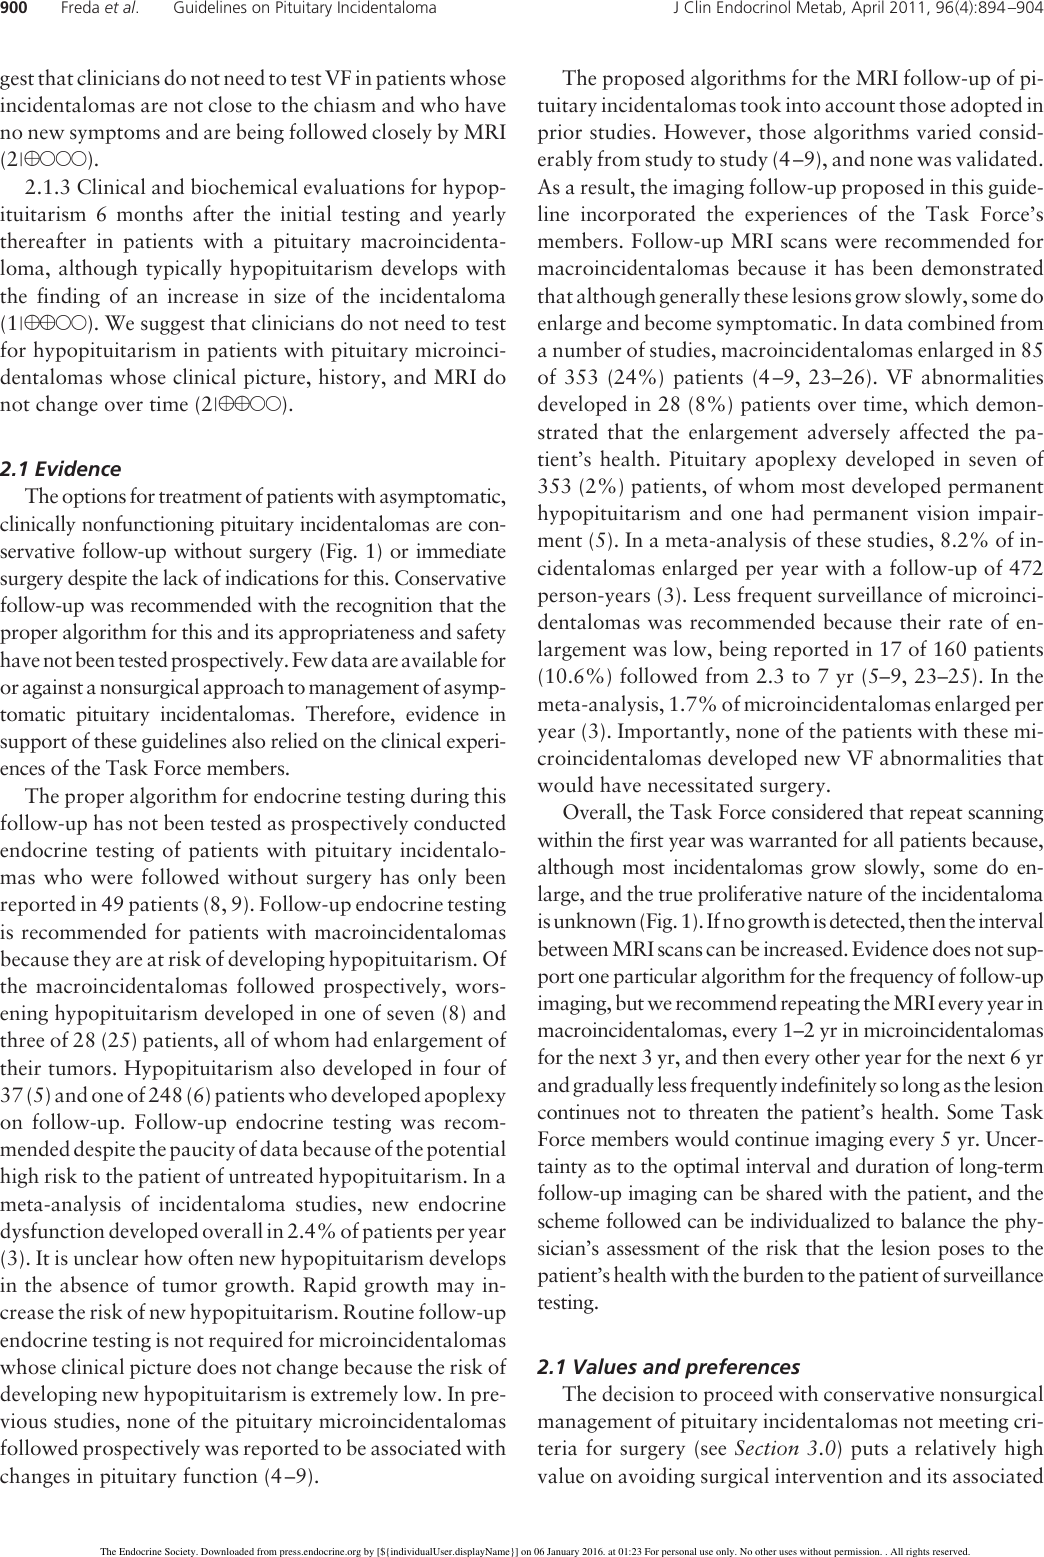 Page 7 of 11 - Pituitary Incidentaloma: An Endocrine Society Clinical Practice Guideline Incidentaloma Guide 2011